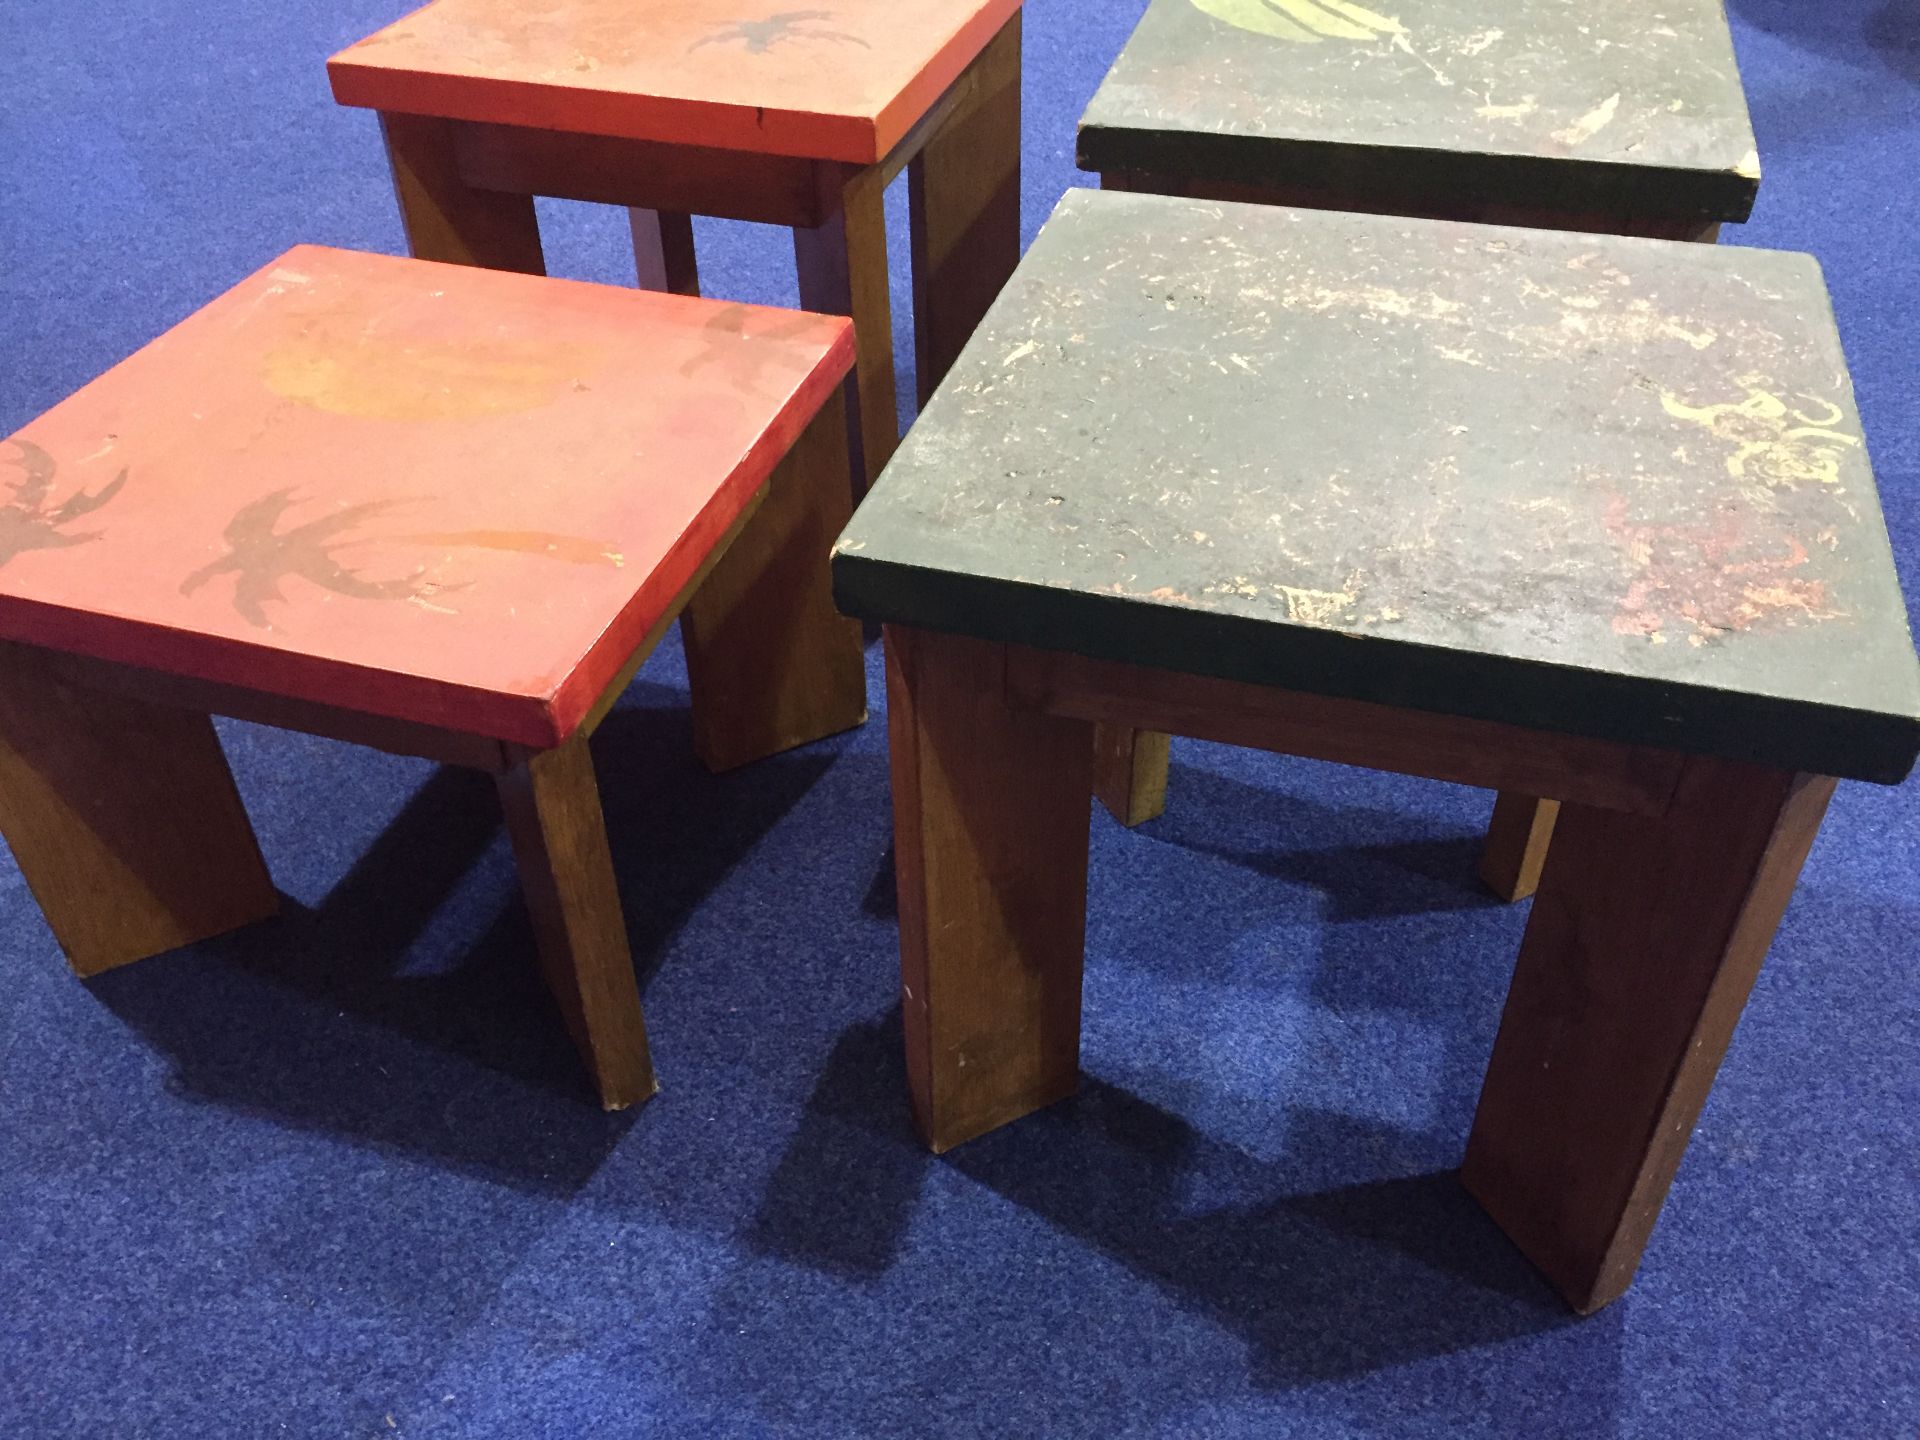 4 Wooden Tables - Image 4 of 4